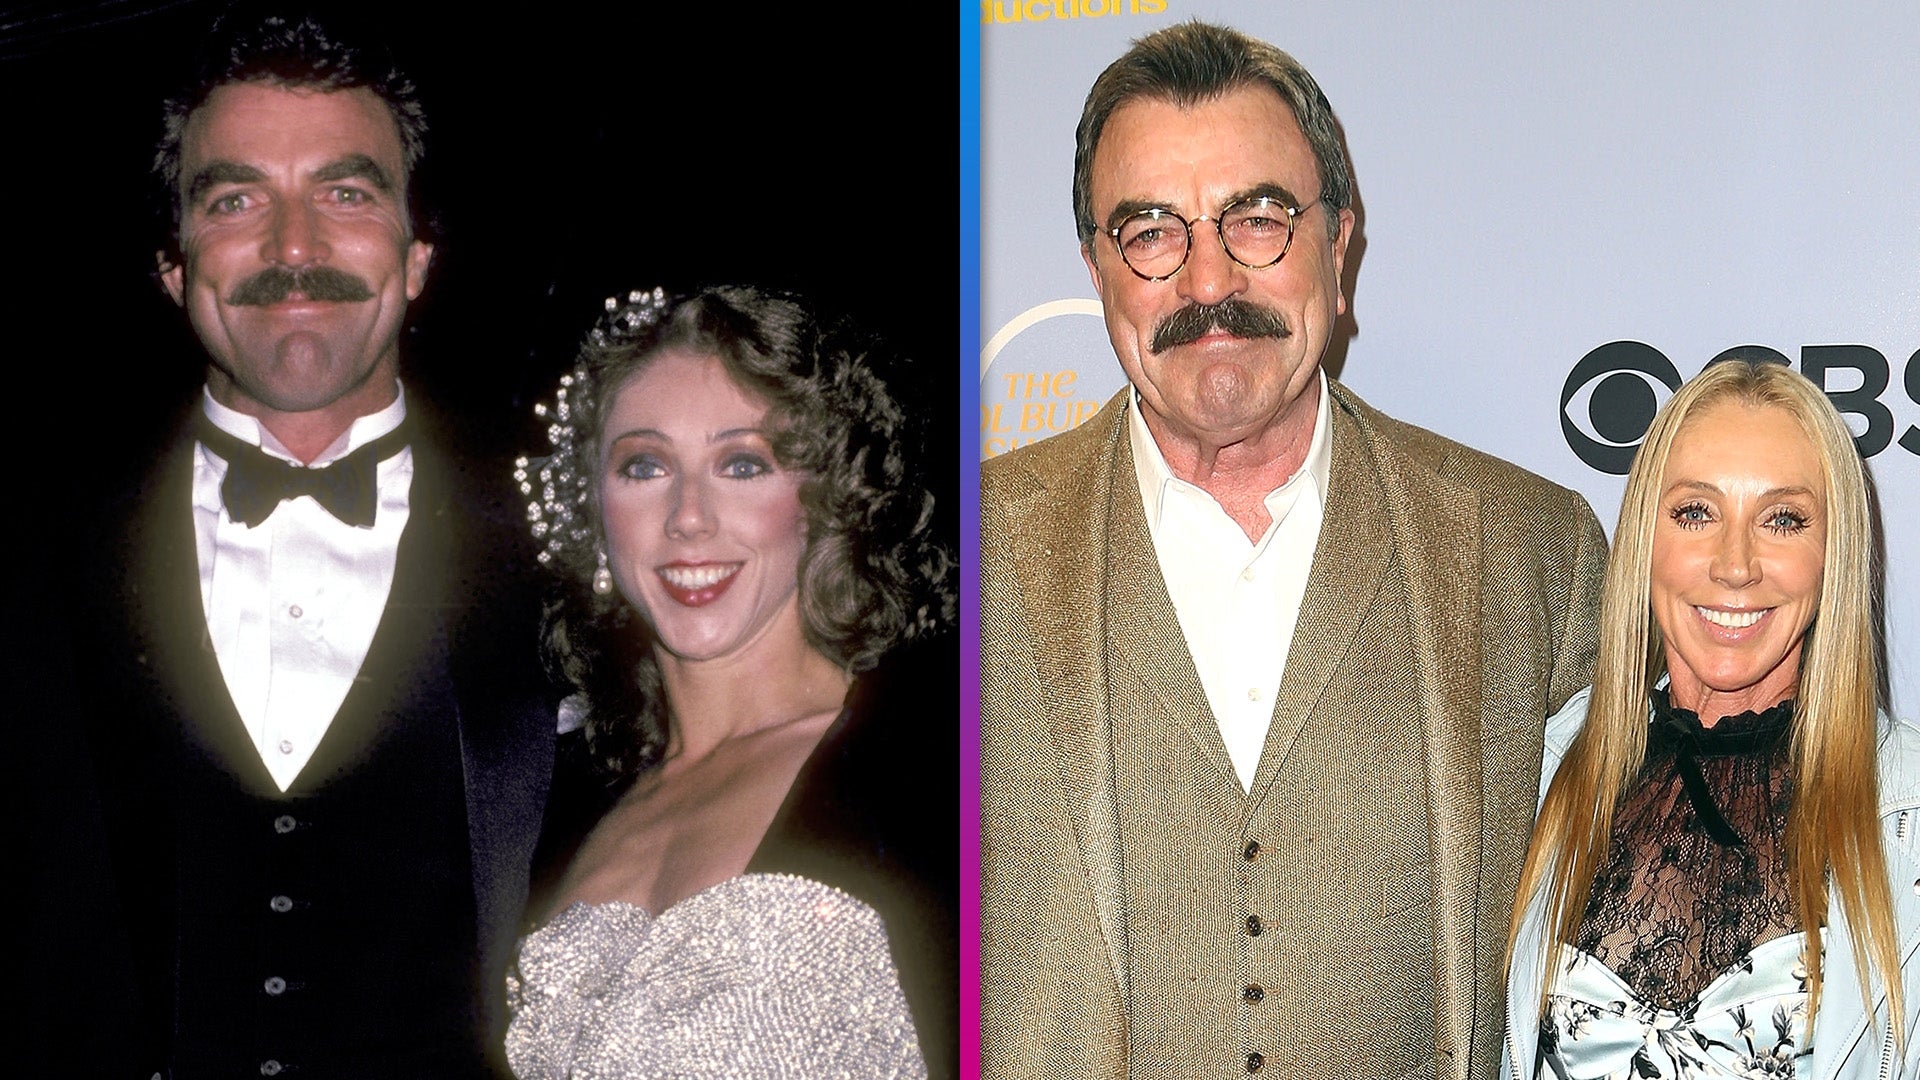 Inside Tom Selleck and Wife Jillie Mack's Love Story as They Celebrate 35th Wedding Anniversary